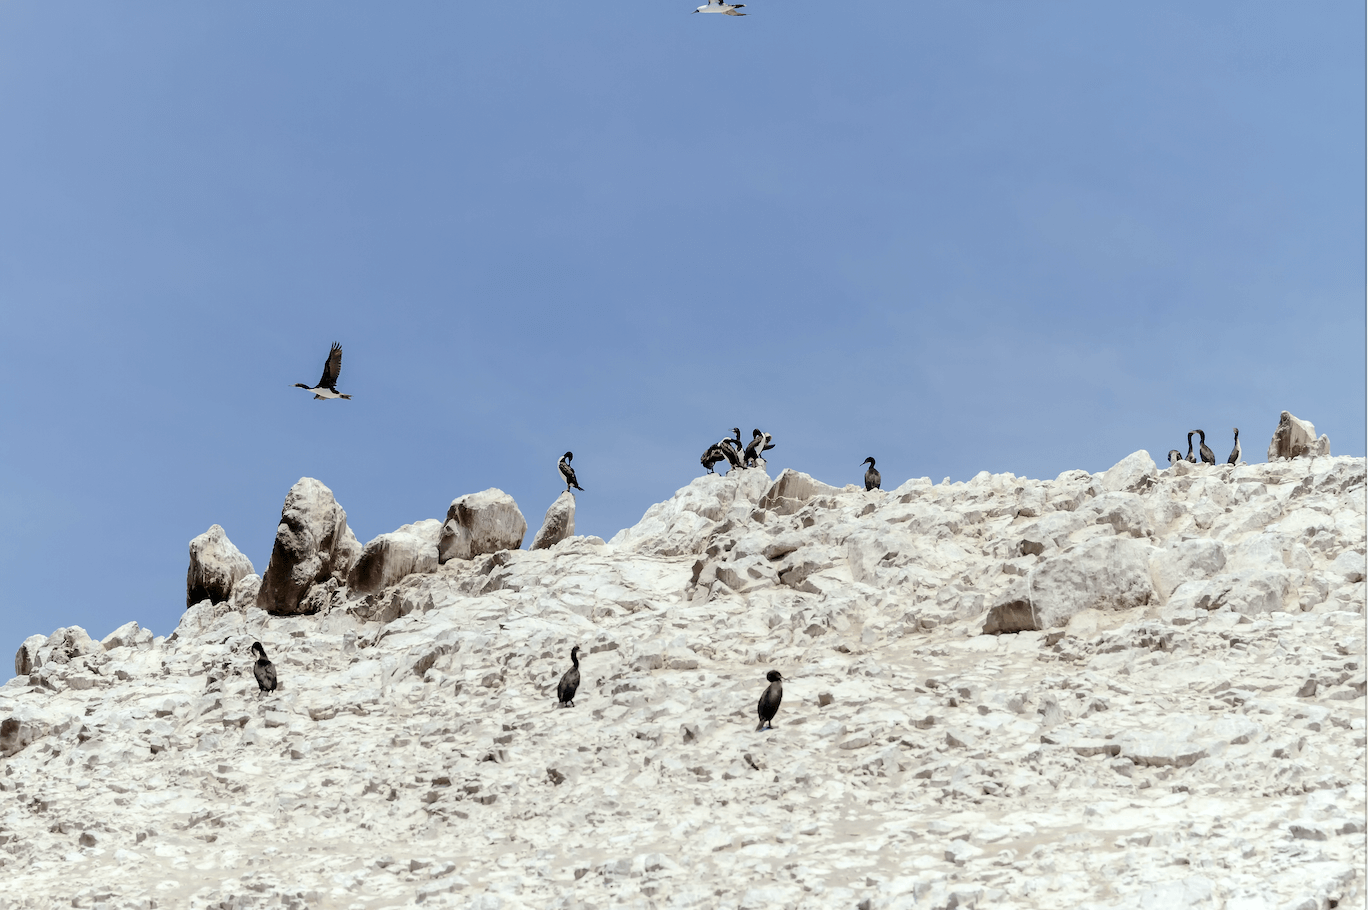 Cormorant birds on the guano in one of the Ballestas Islands